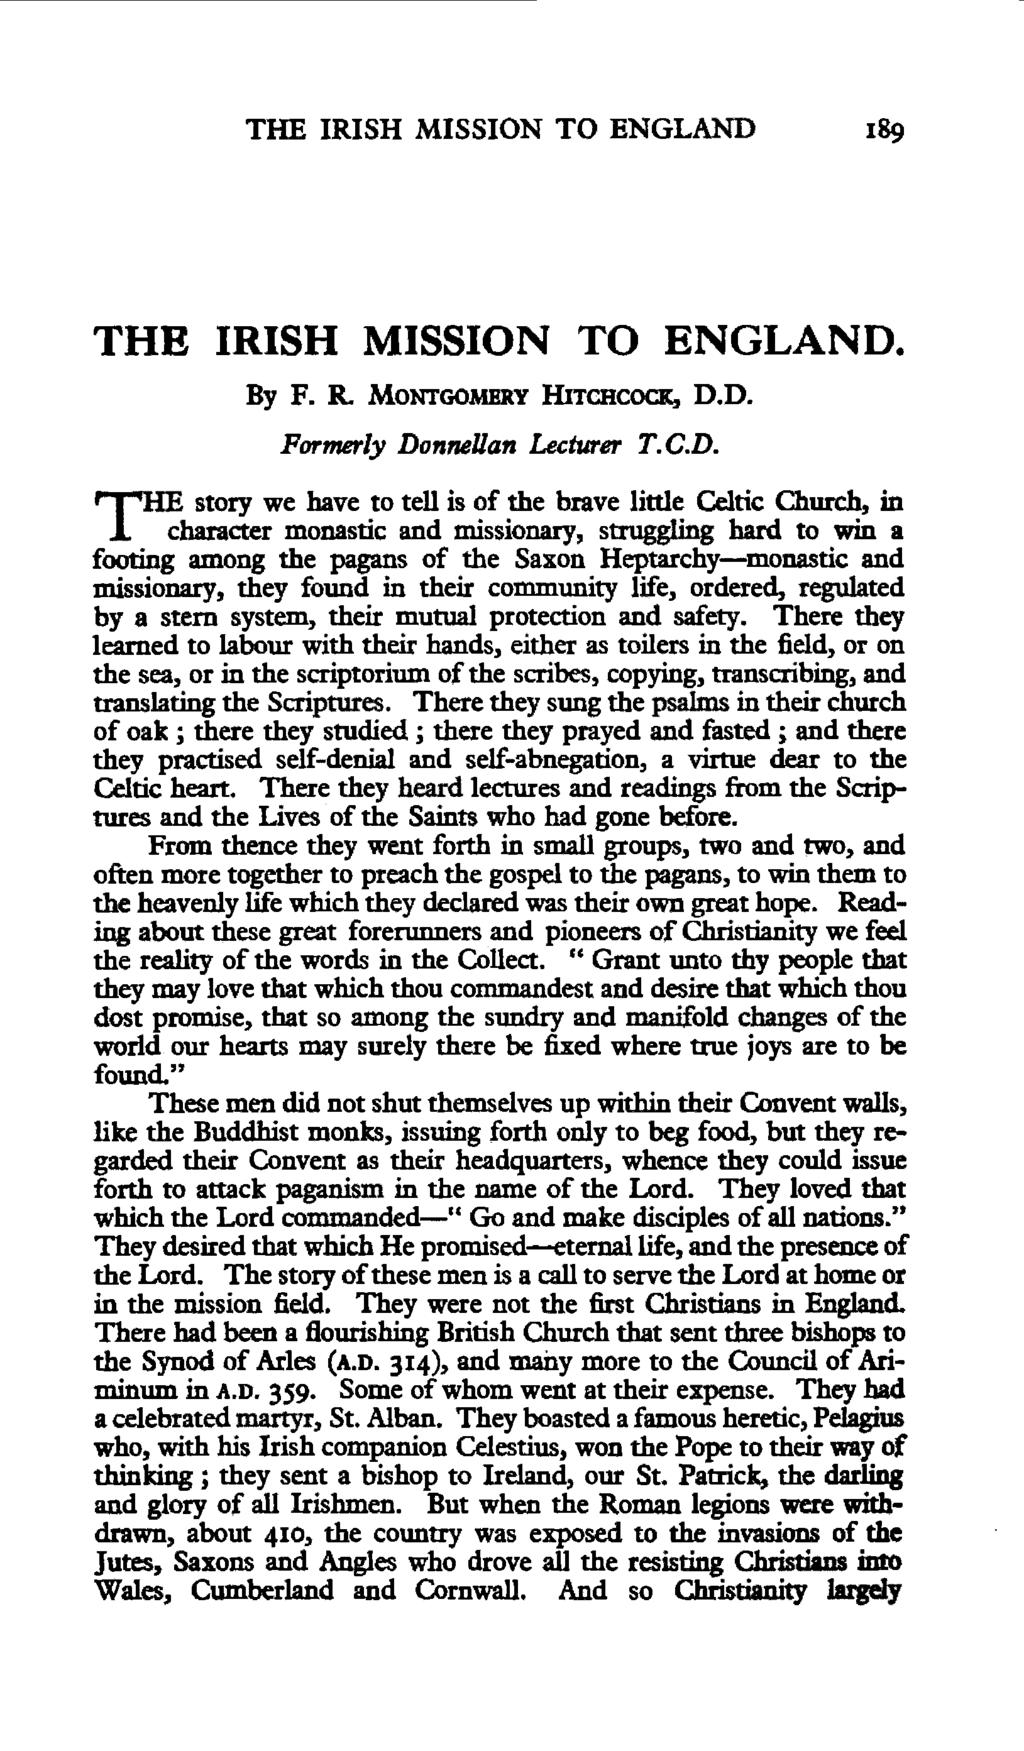 THE IRISH MISSION TO ENGLAND 189 THB IRISH MISSION TO ENGLAND. By F. R. MoNTGOMERY HITCHCOCIC, D.D. Formerly Donnellan Lecturer T.C.D. rrhe story we have to tell is of the brave little Celtic Church, in J.